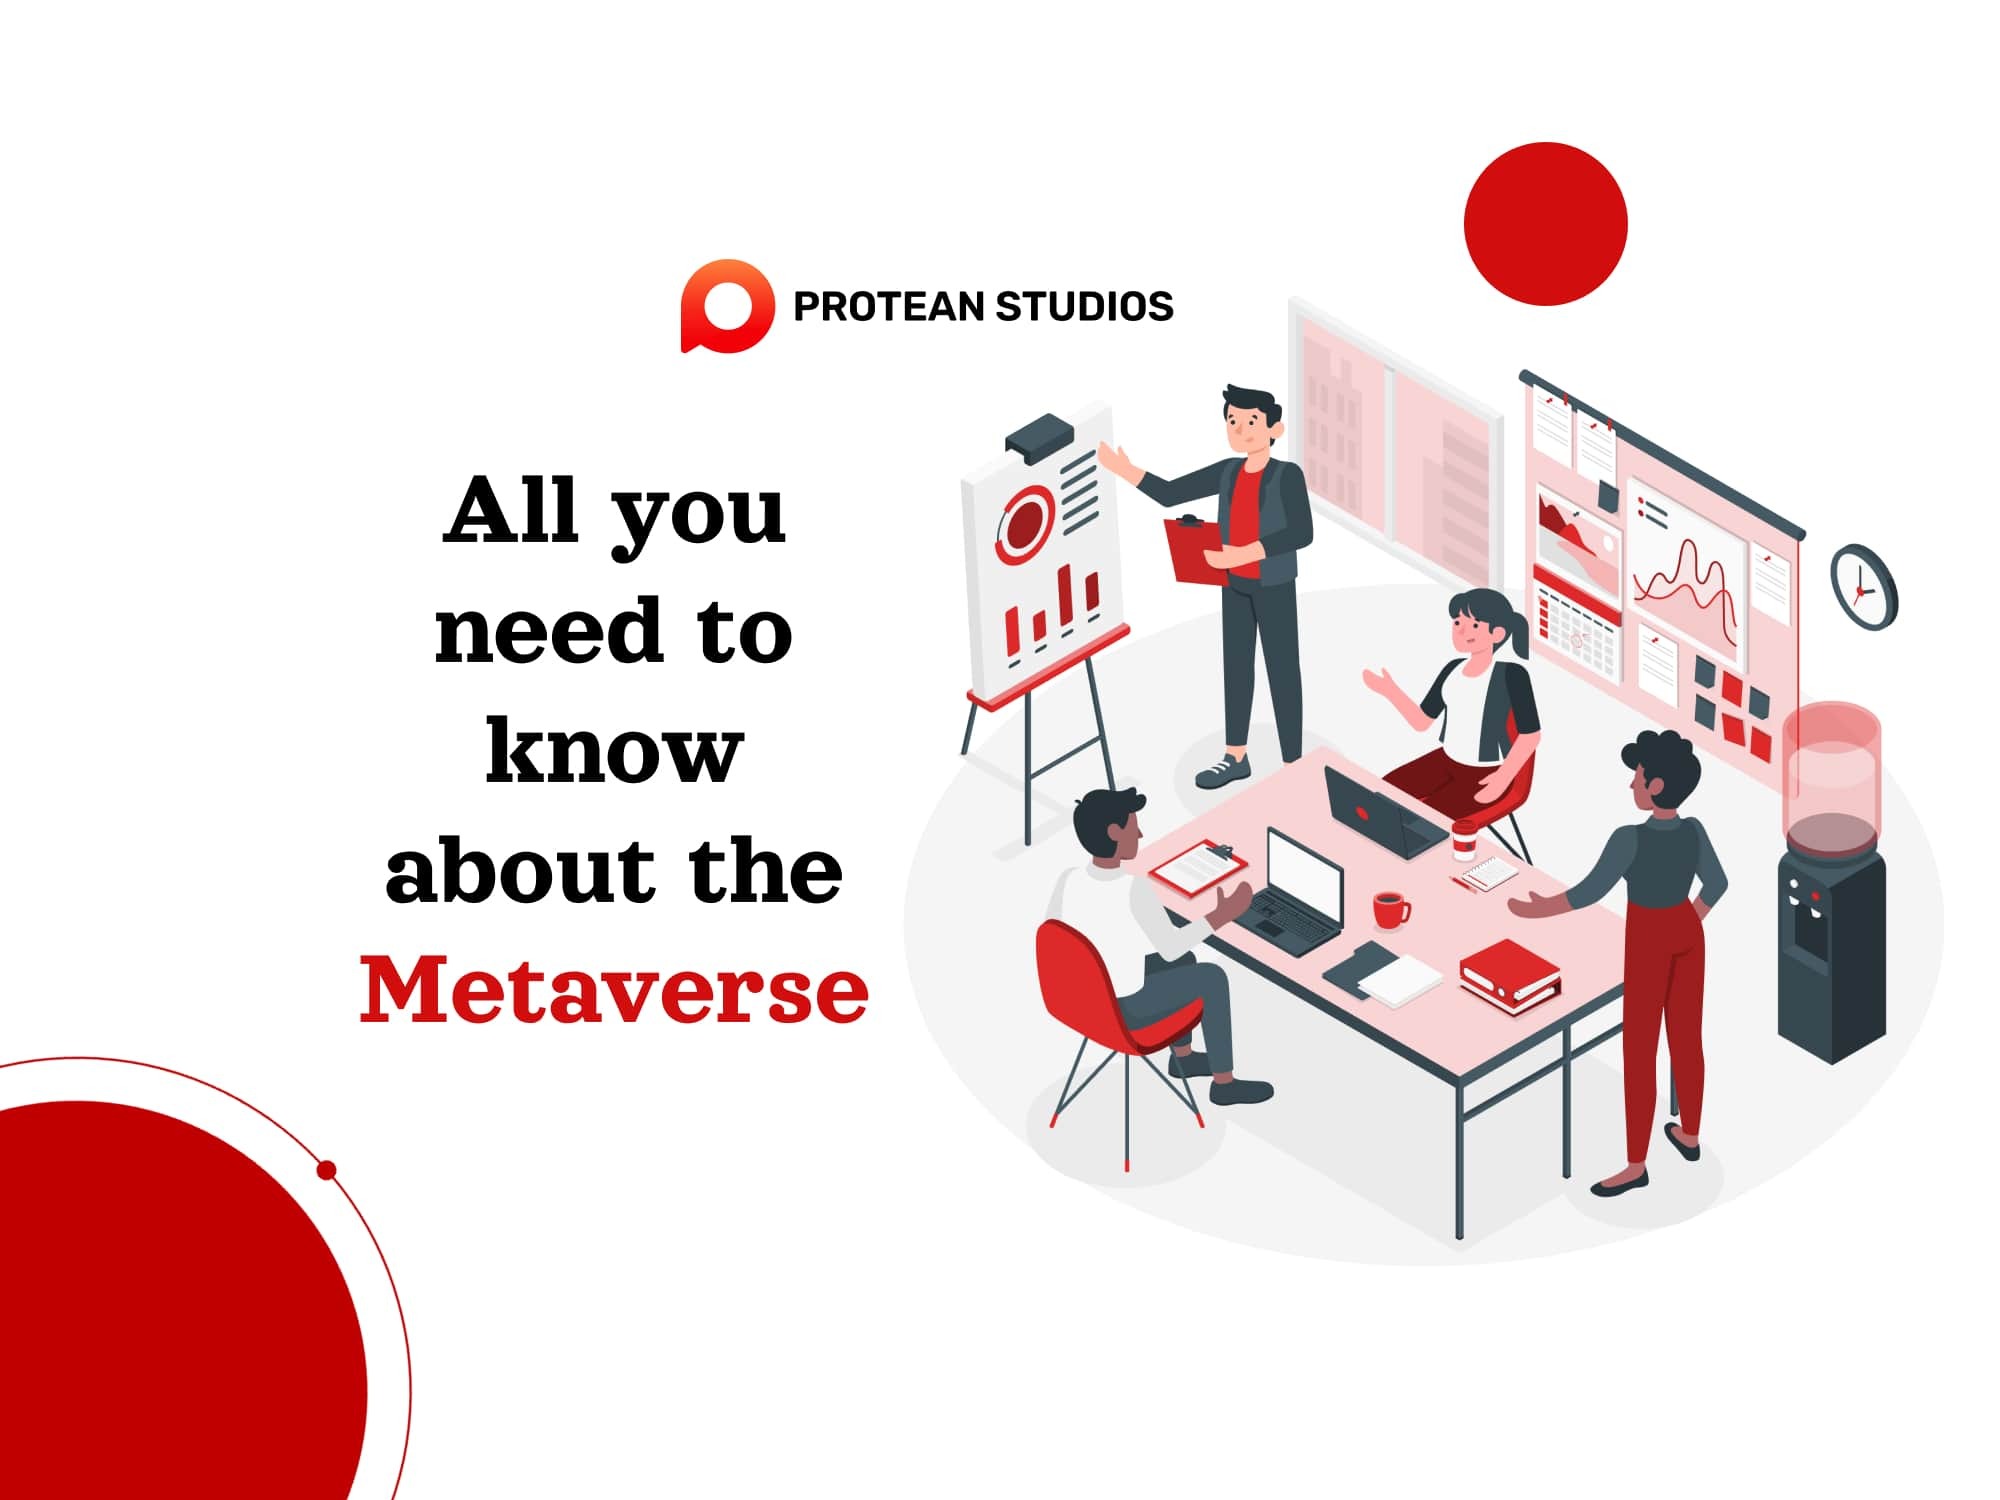 All you need to know about the metaverse